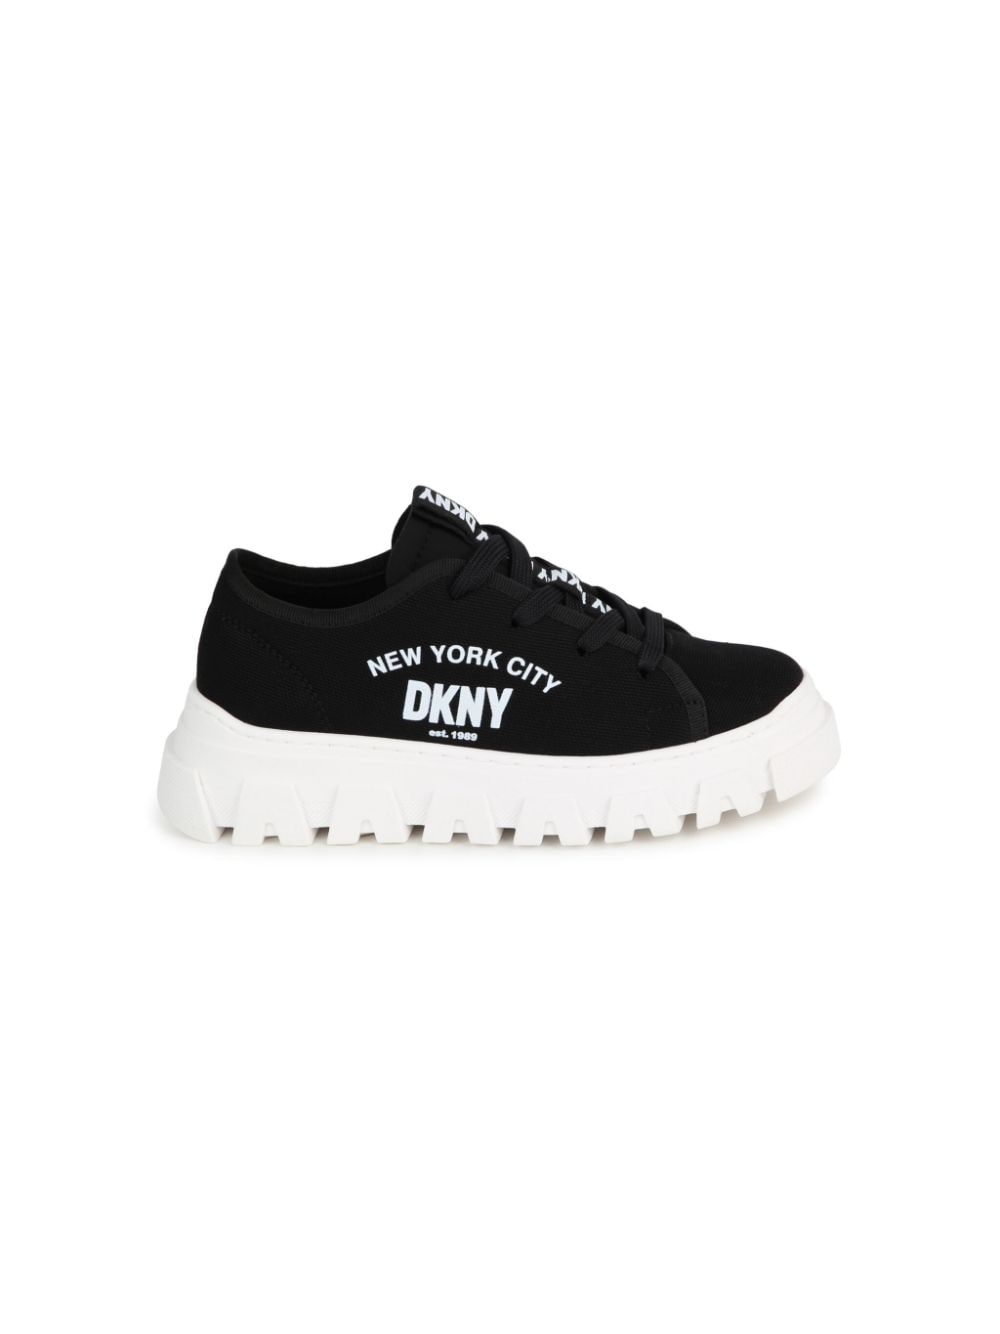 Image 2 of Dkny Kids logo-print canvas sneakers